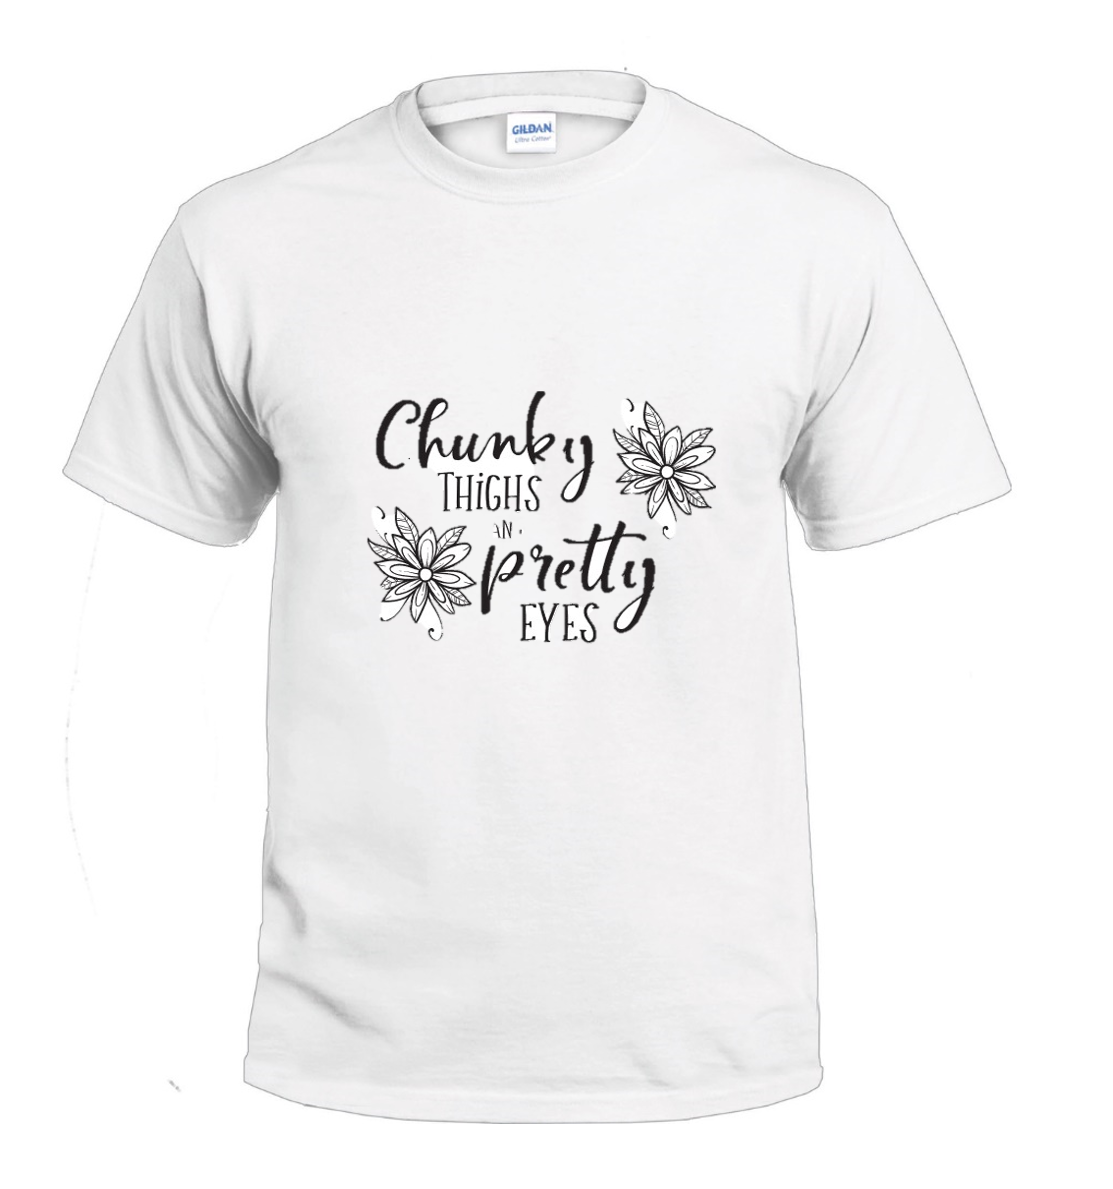 Chunky Thighs and Pretty Eyes t-shirt